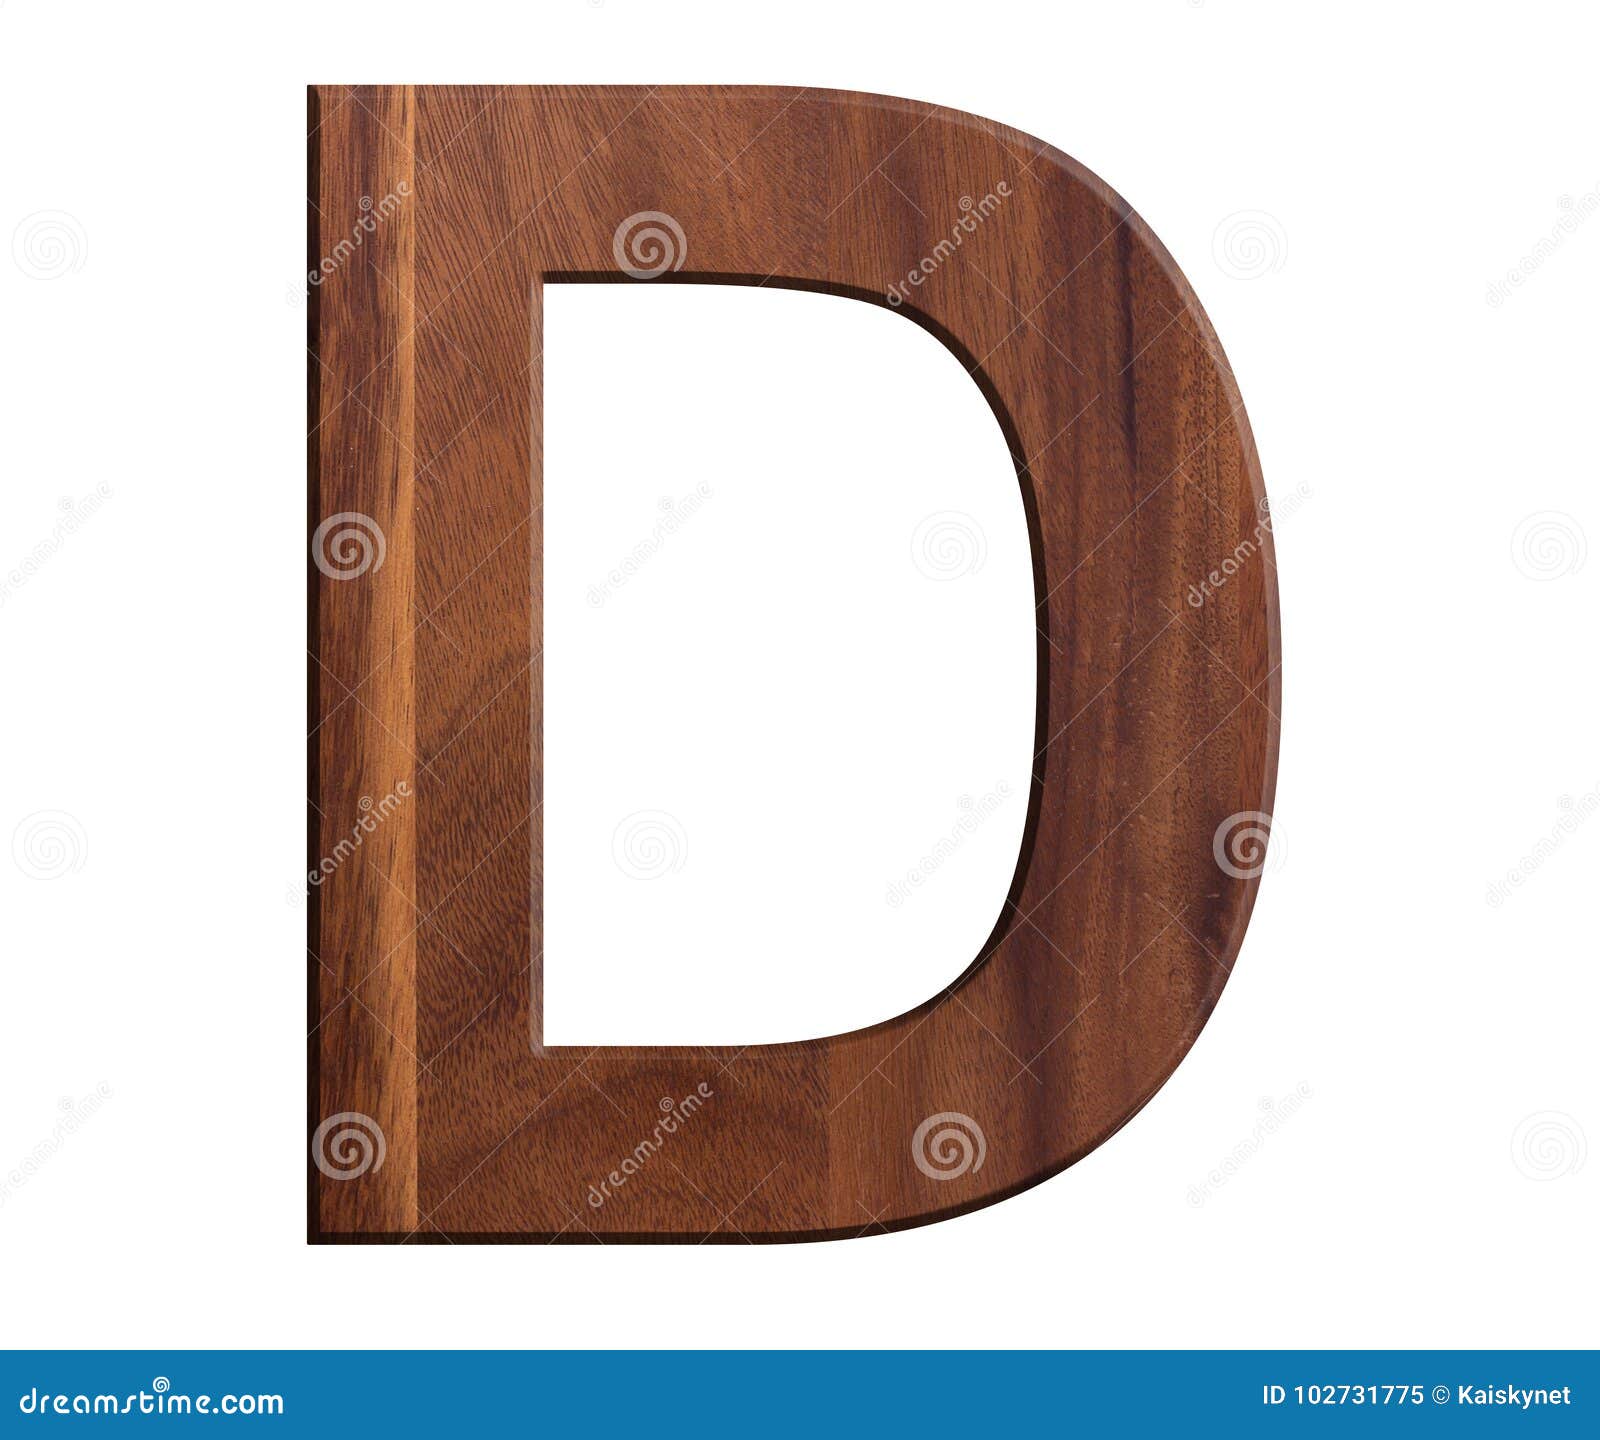 Alphabet Letters Wooden on a White Background Stock Image - Image of ...